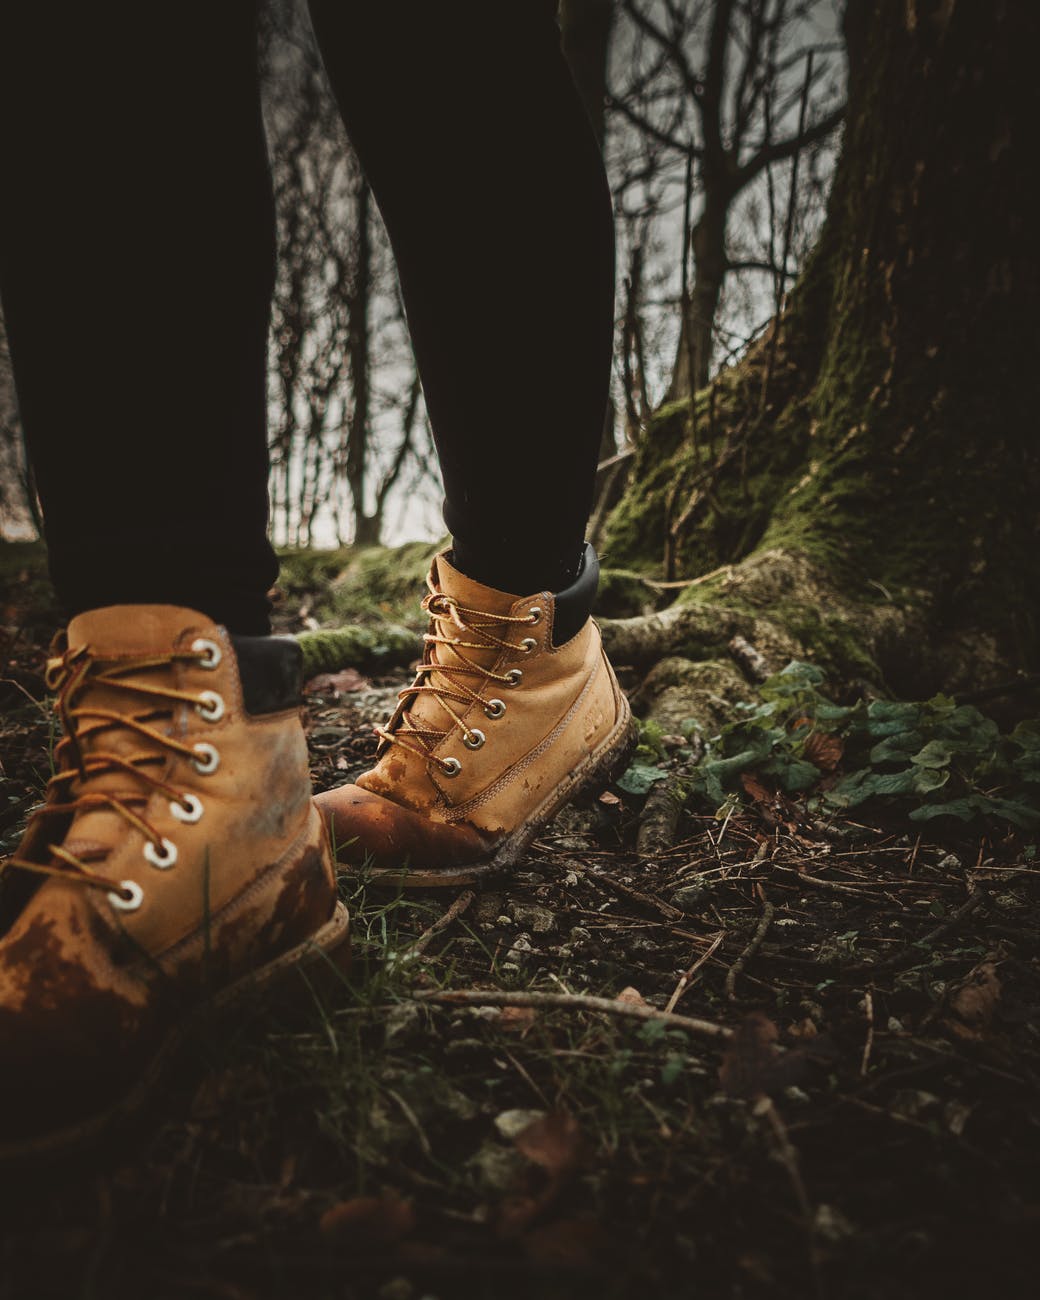 person wearing brown leather hiking boots standing on brown dried leaves